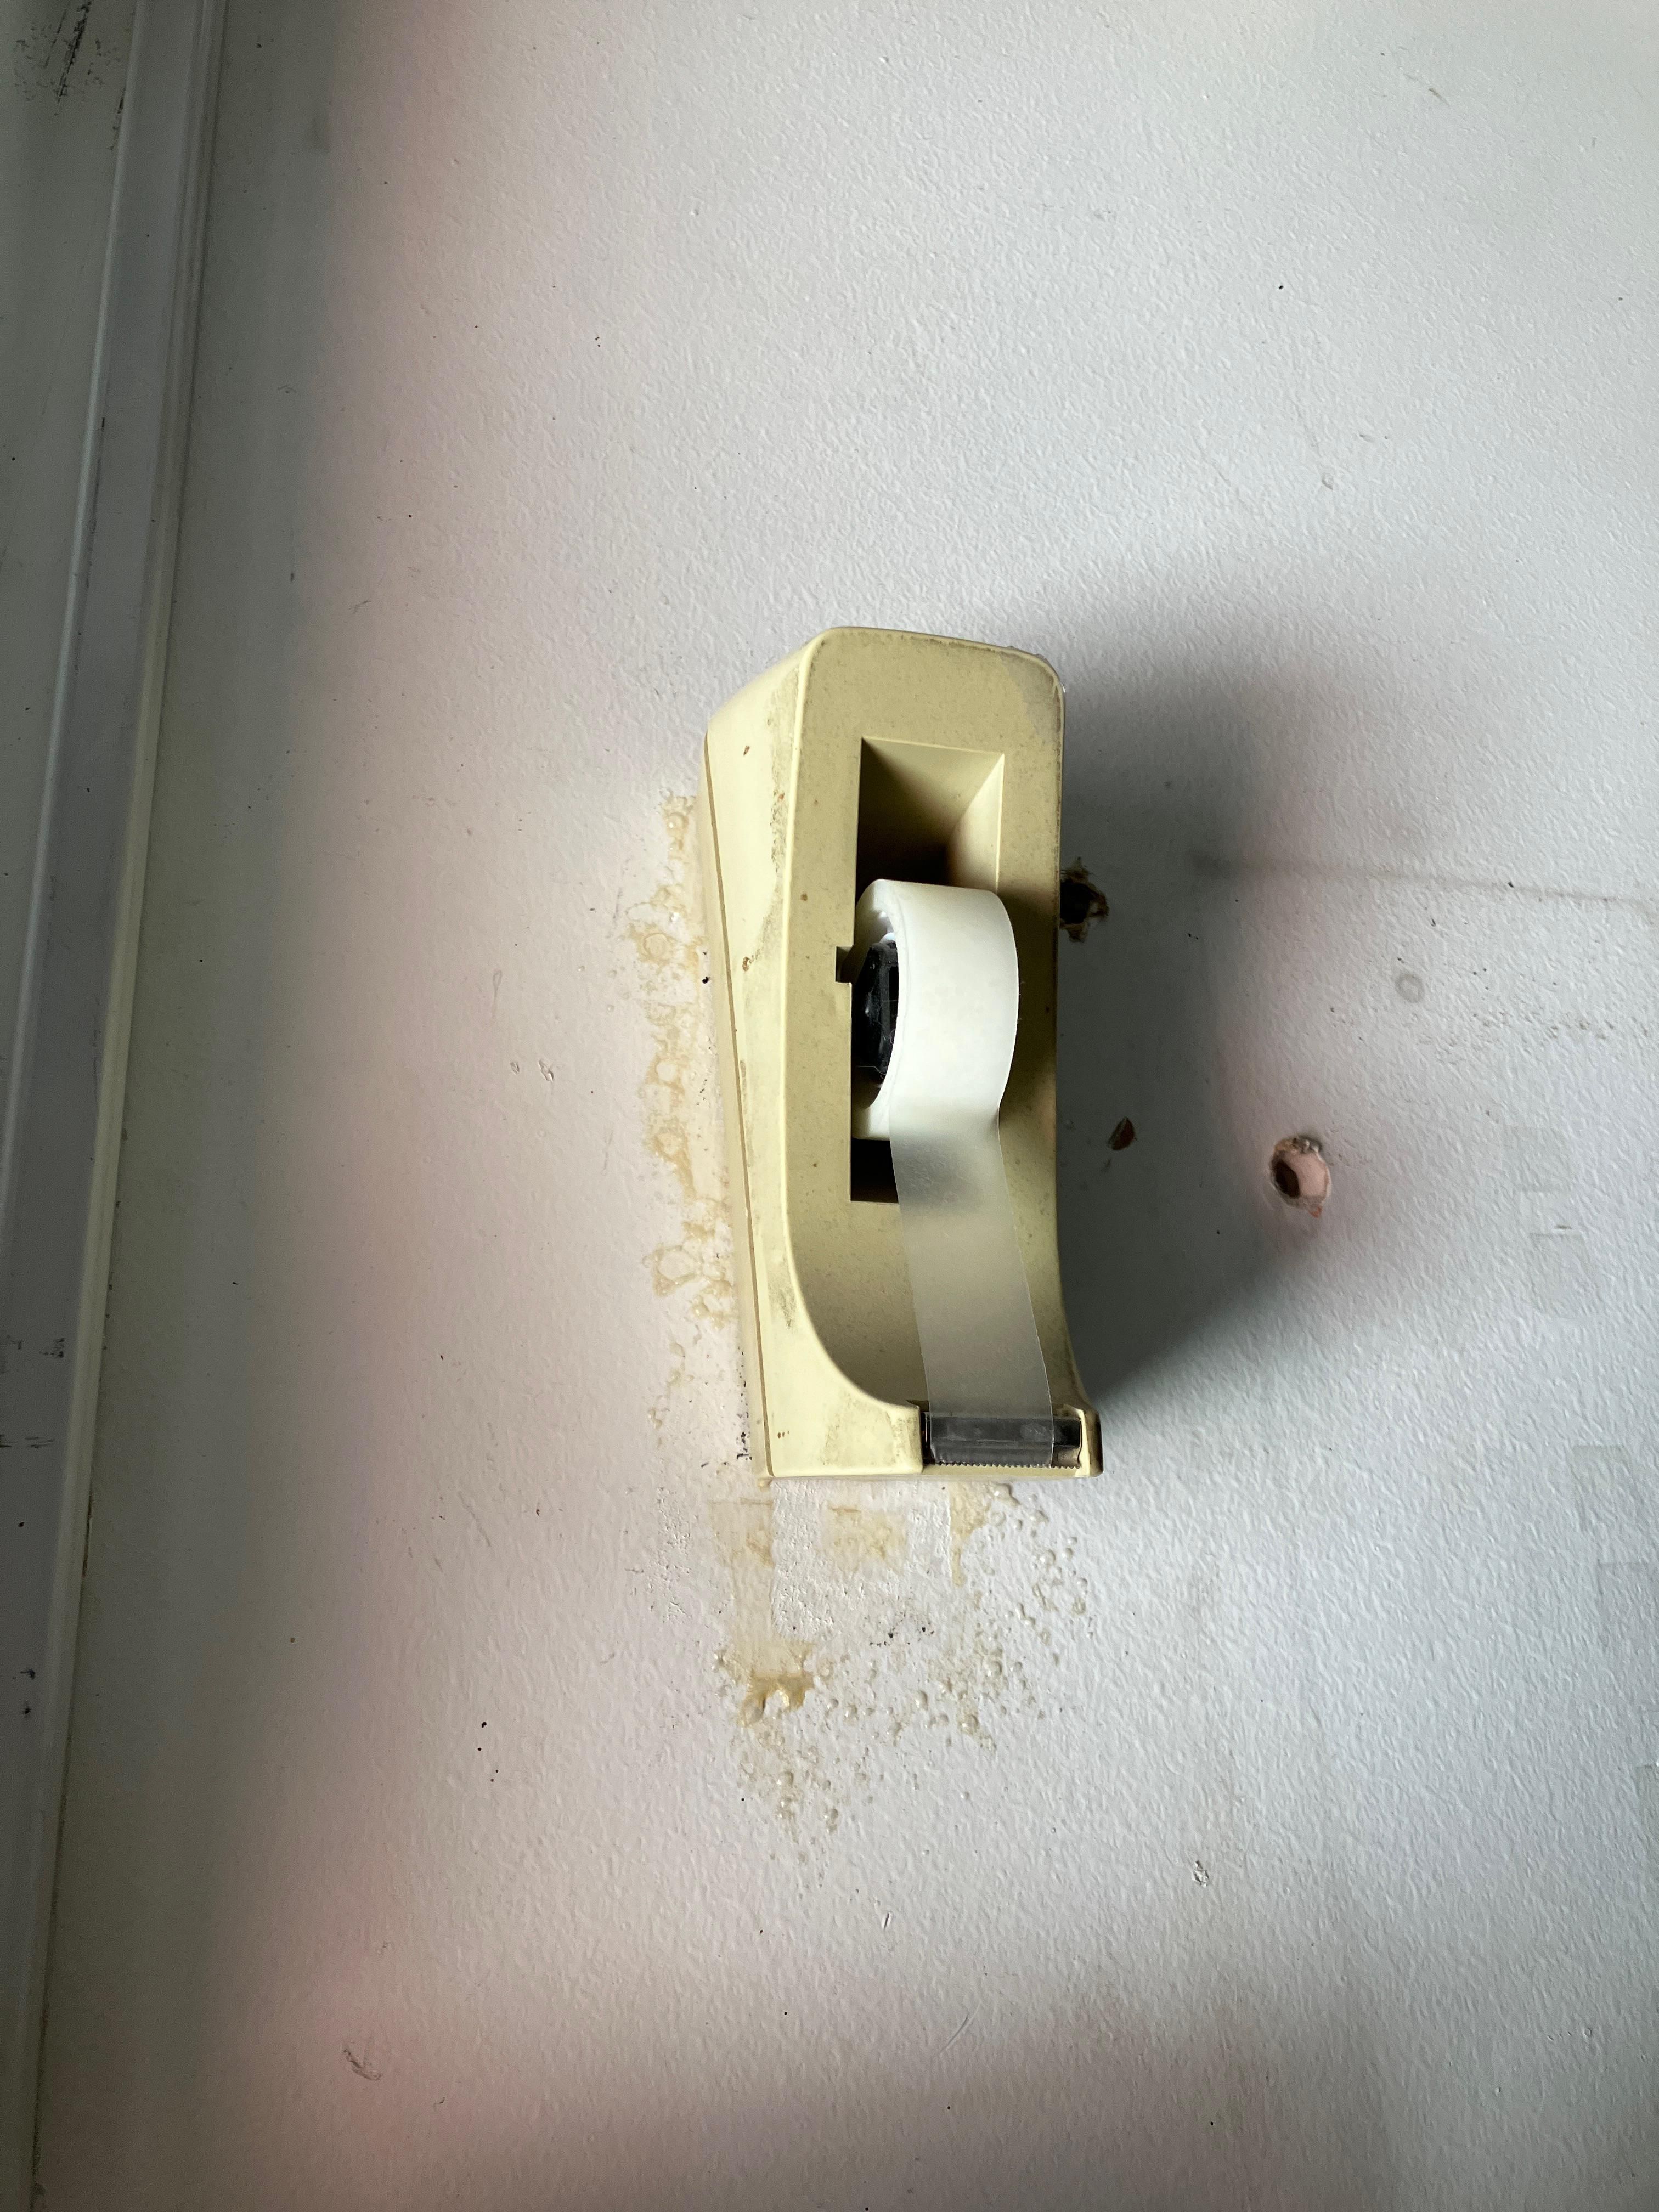 Someone stole the tape dispenser from my desk at work and glued it to the wall in our electrical panel room. I don’t know why.